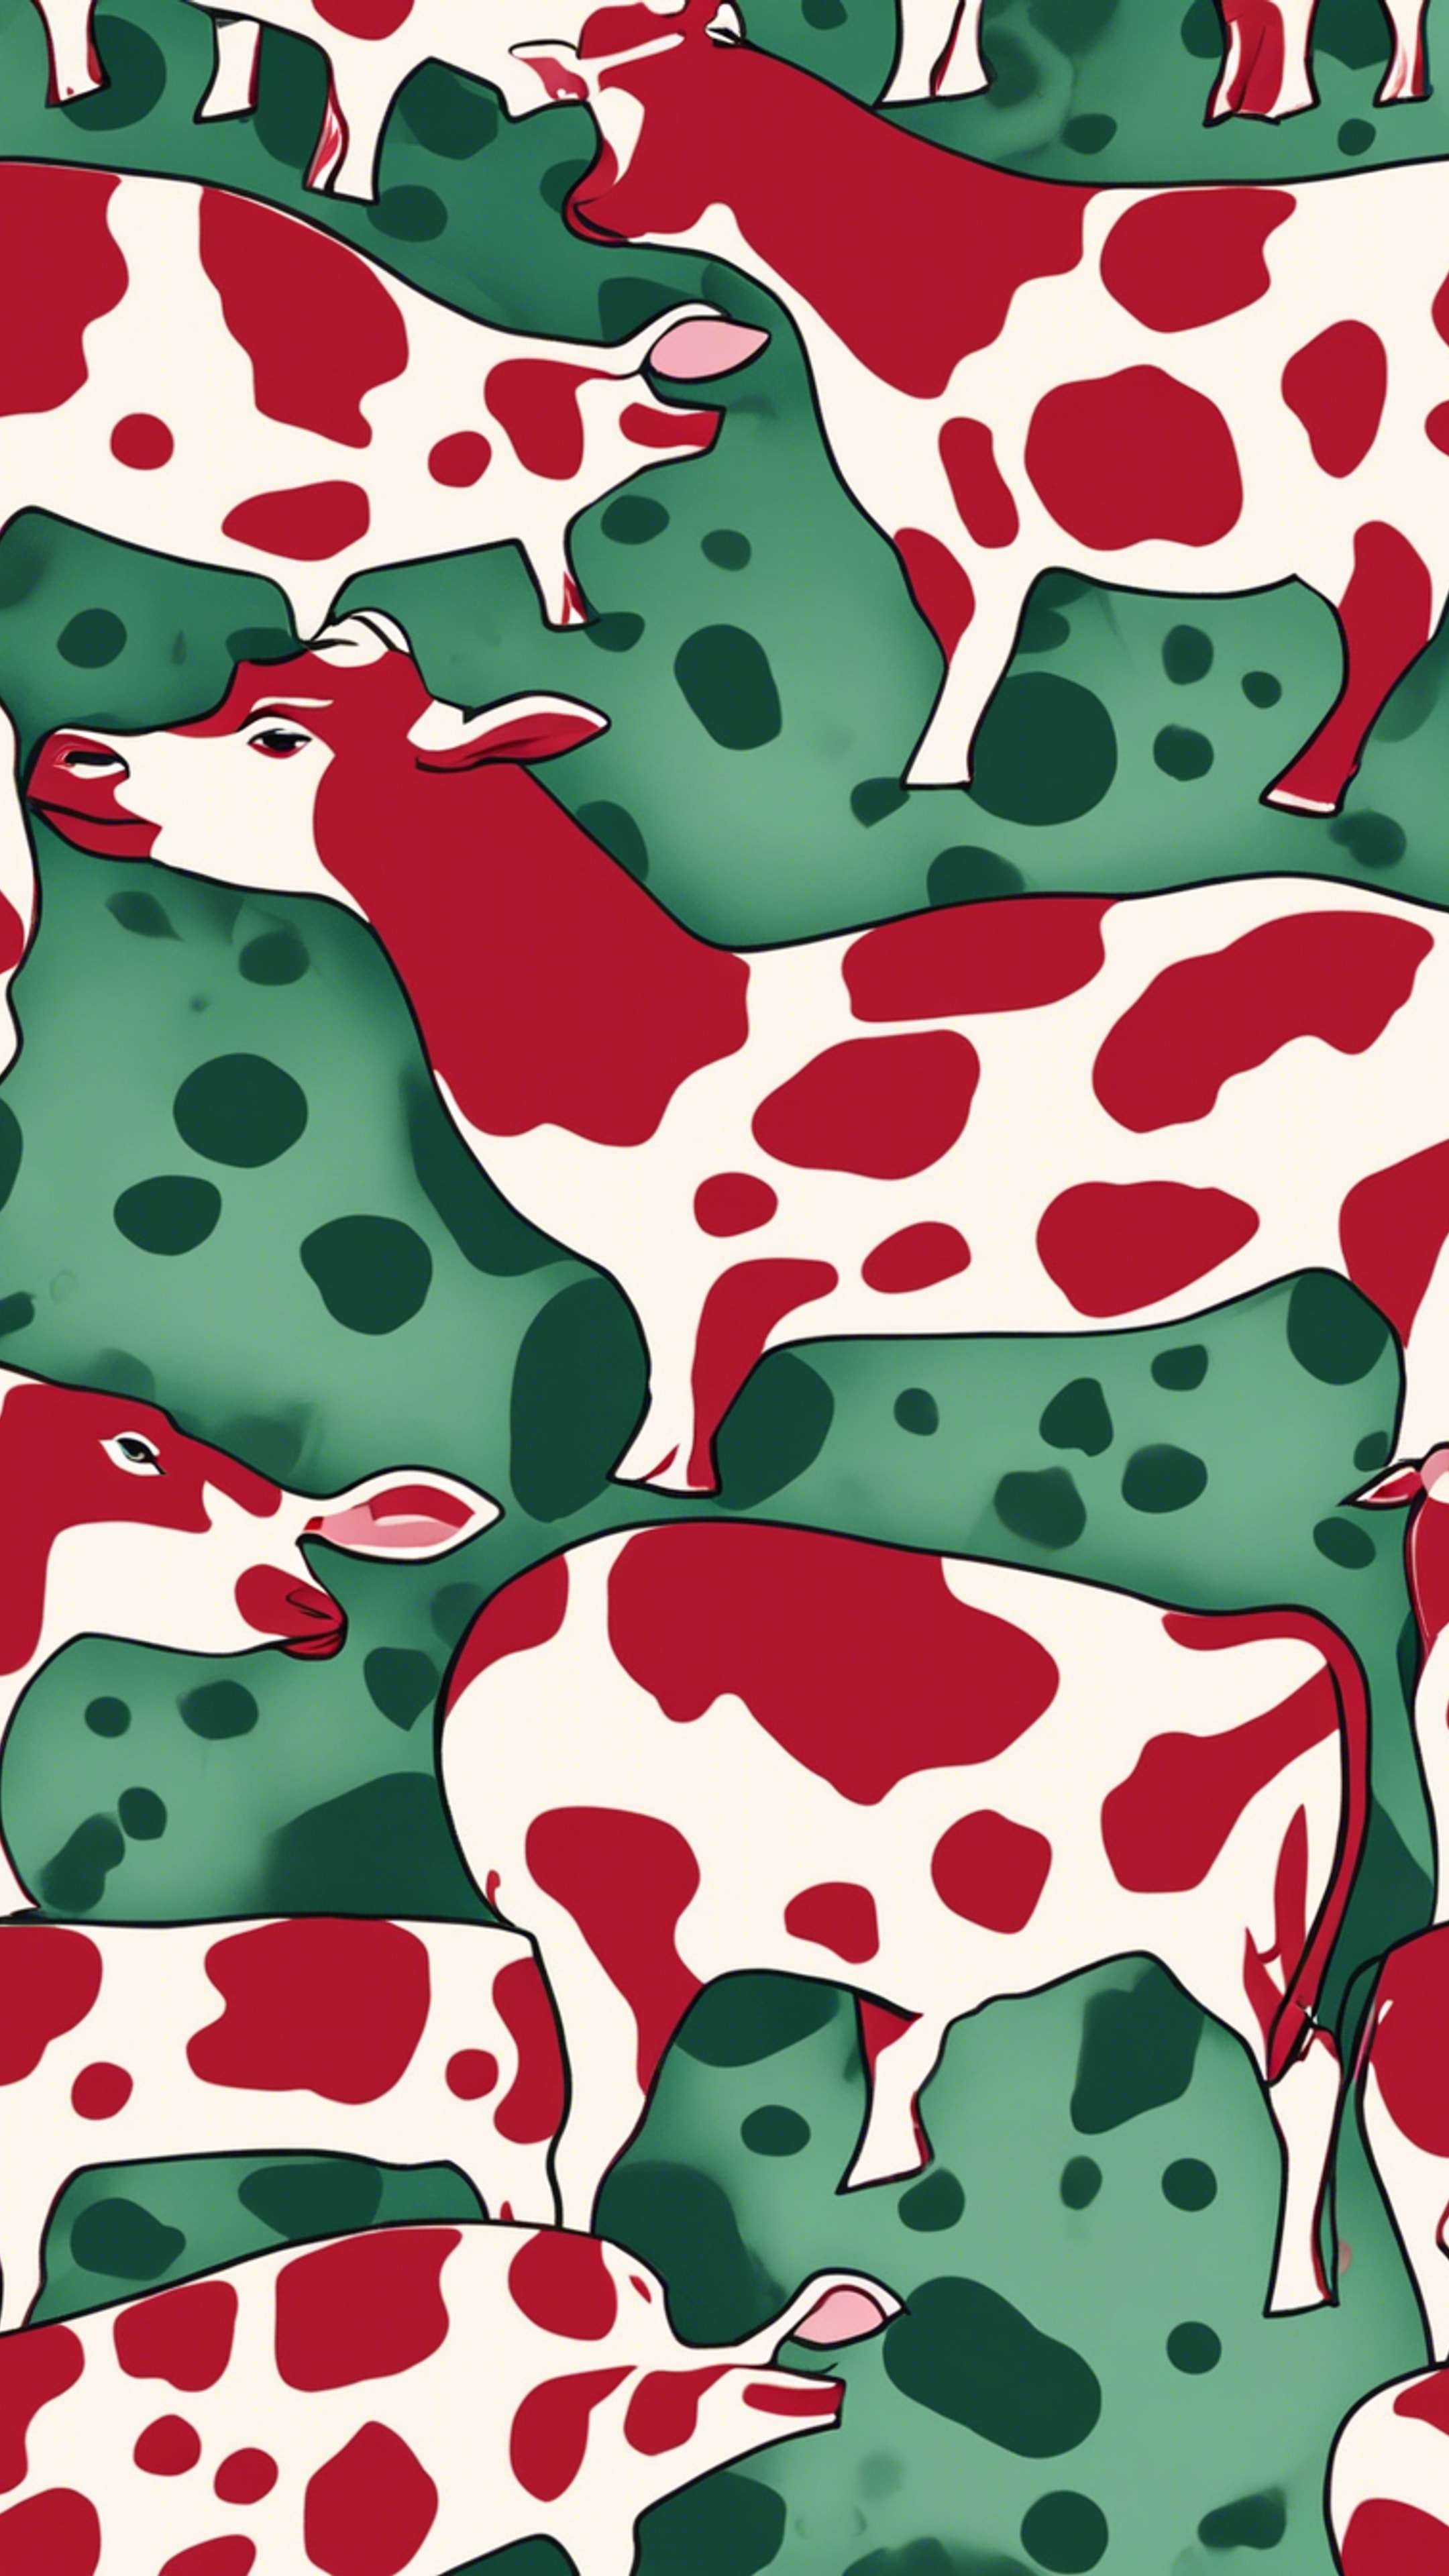 A dynamic, textured pattern of red and green cow spots. วอลล์เปเปอร์[159333102a774de6a0e2]